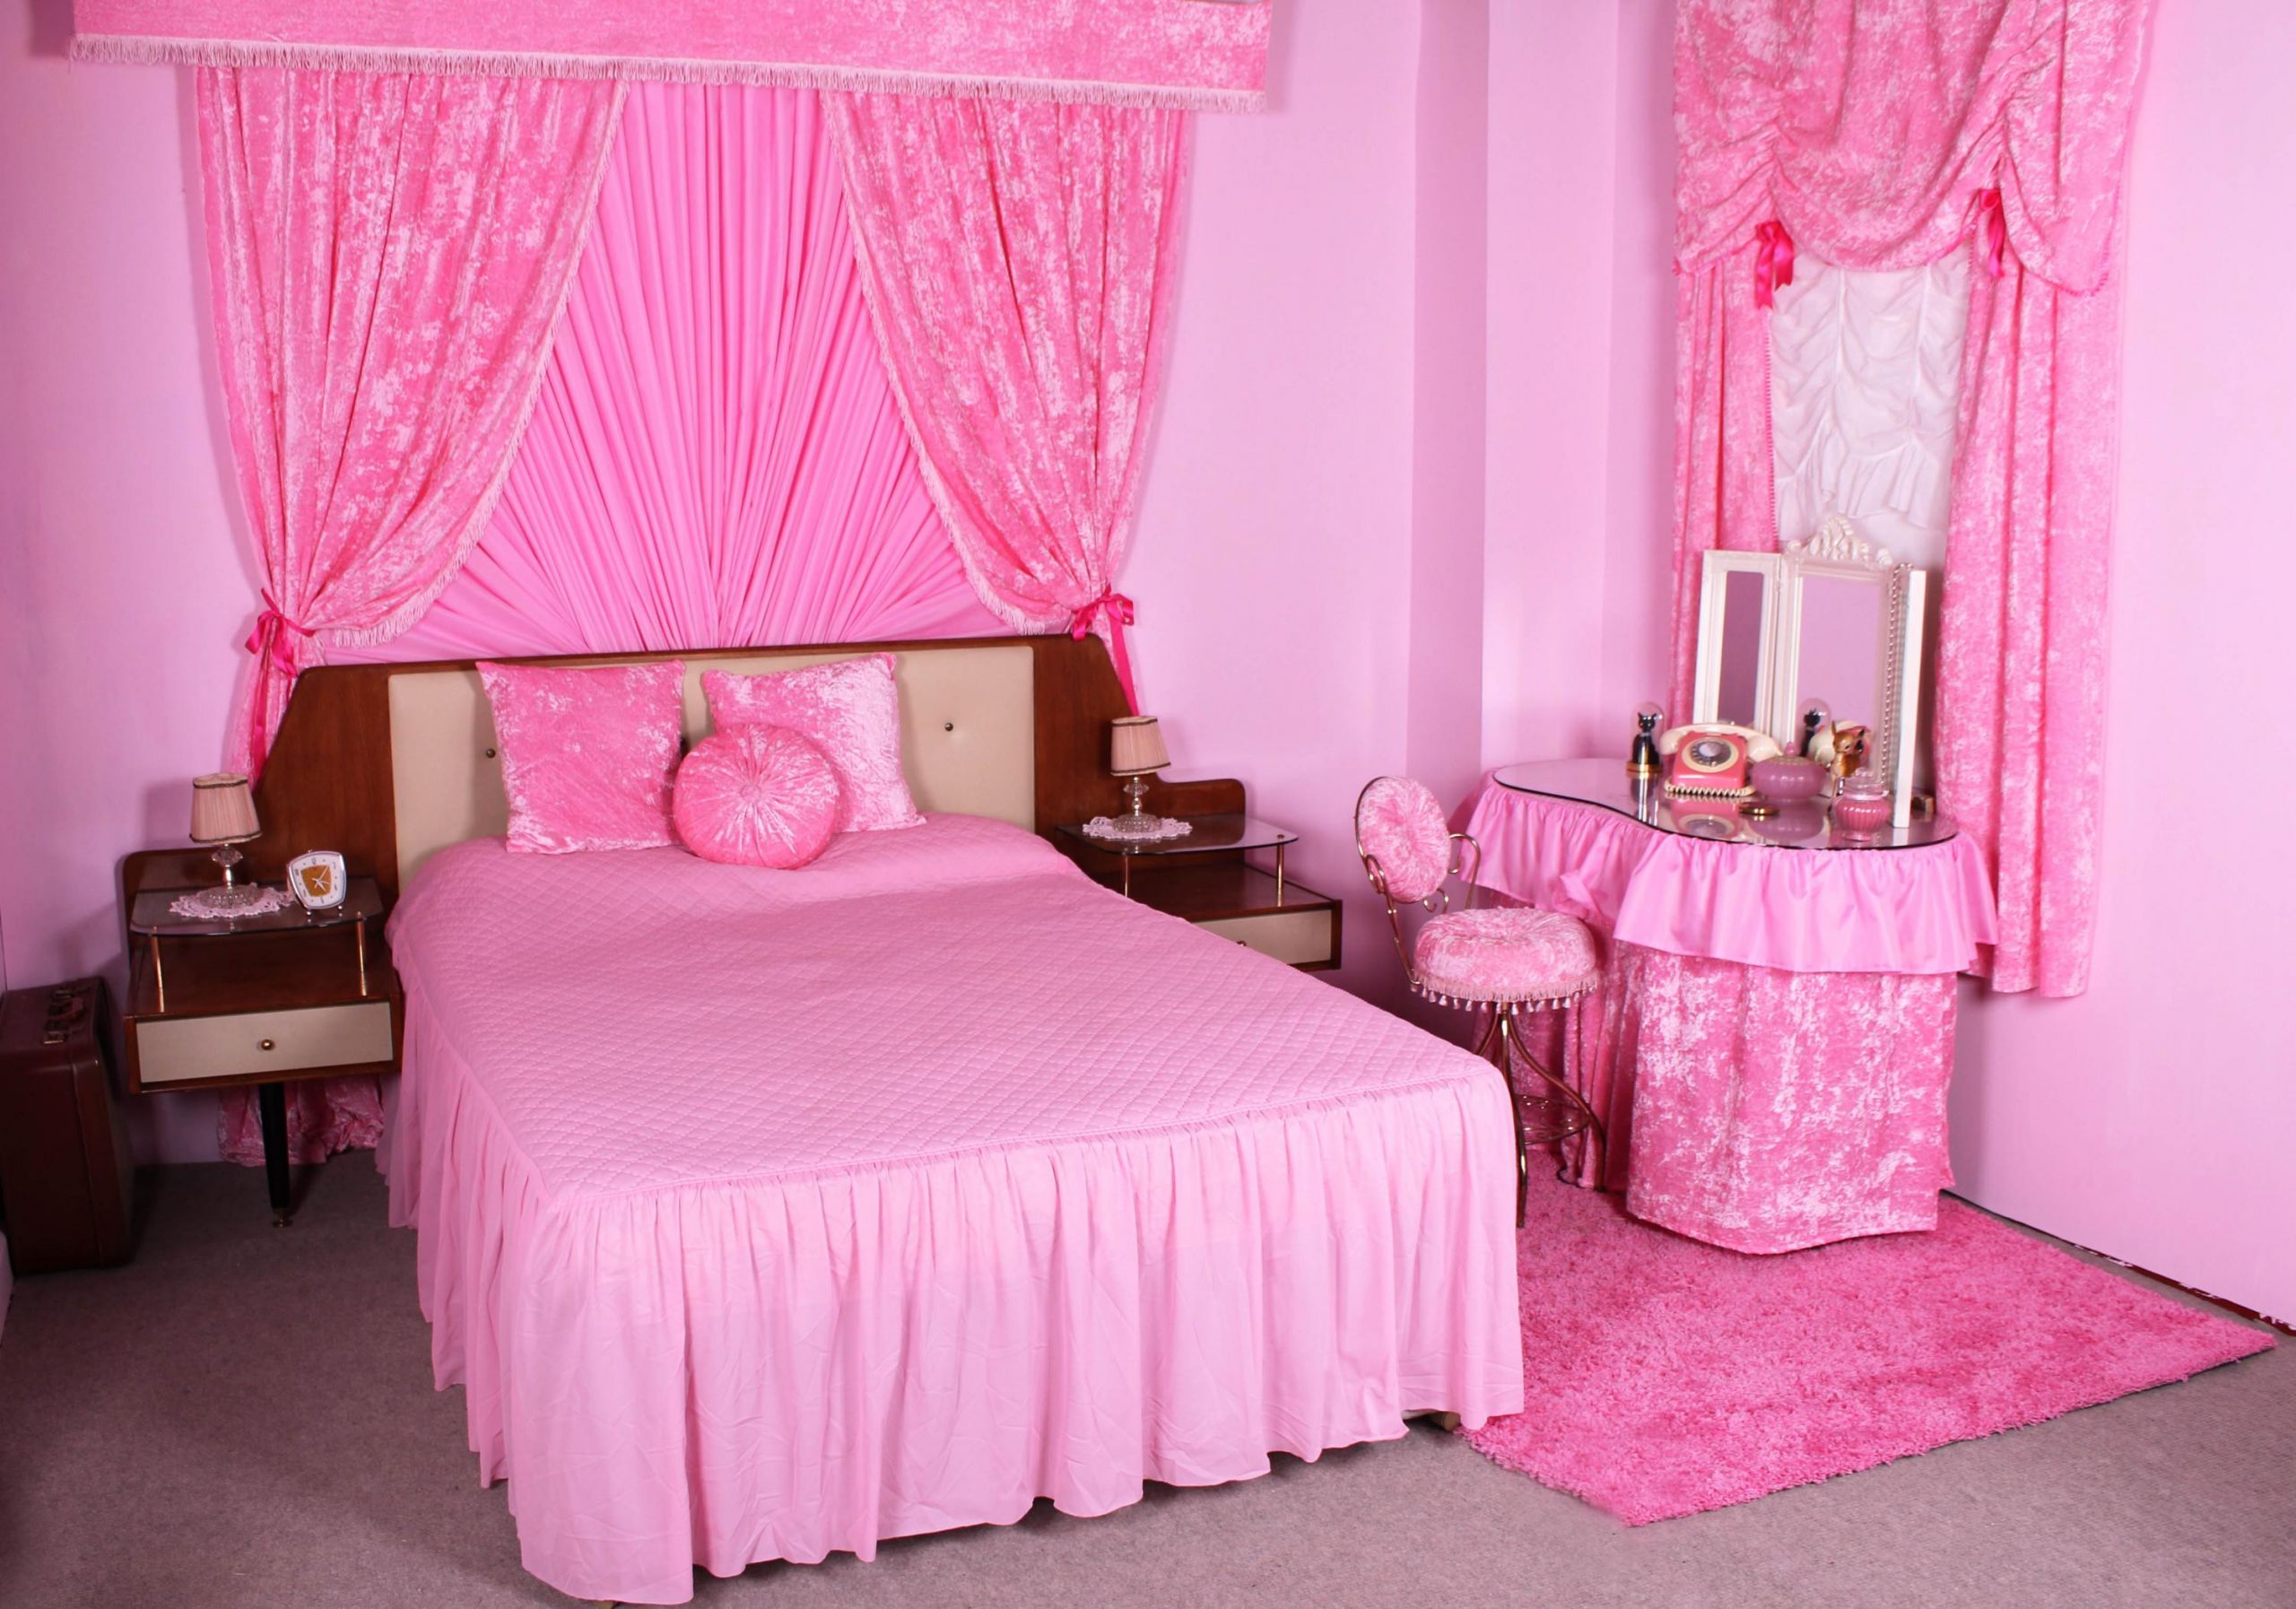 Girl In The Bedroom
 40 Best Dream Bedroom Design Ideas In All Colors And Sizes